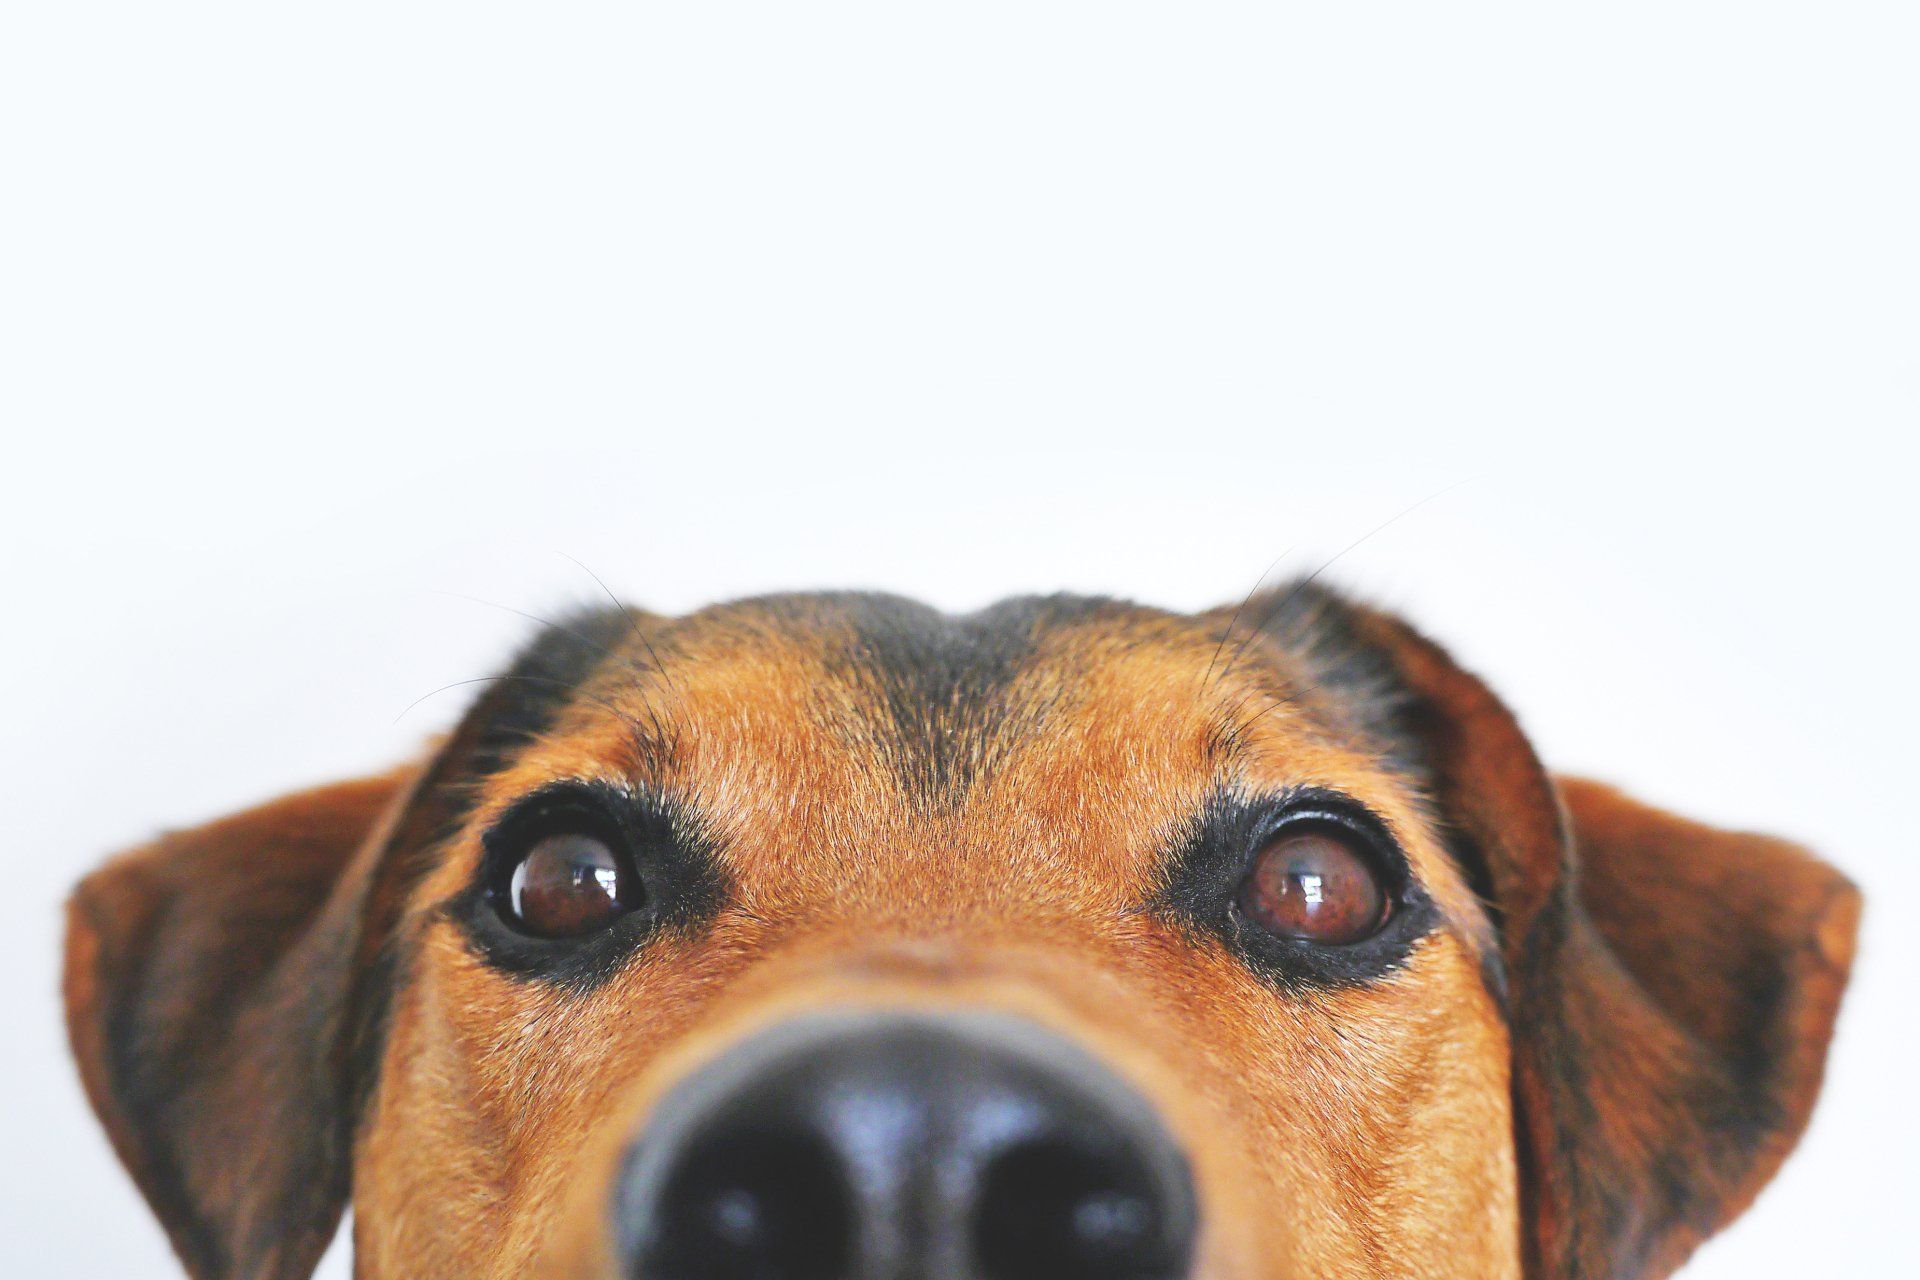 a close up of a brown dog 's face against a white background .